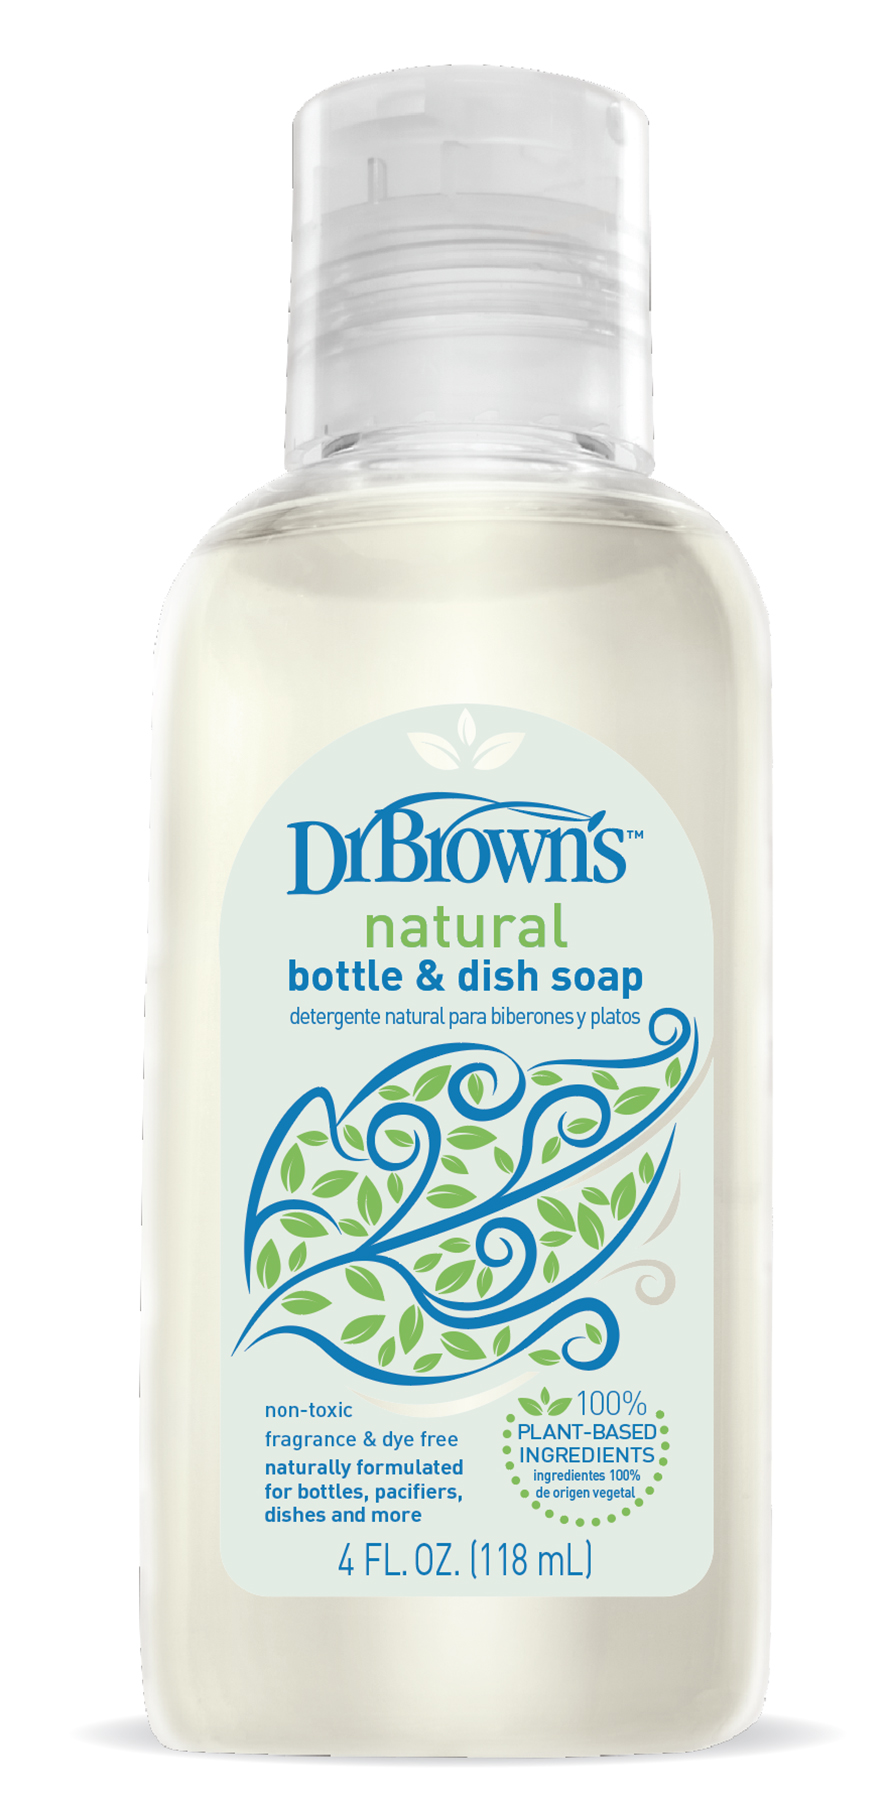 Dr. Brown's Natural bottle and dish soap